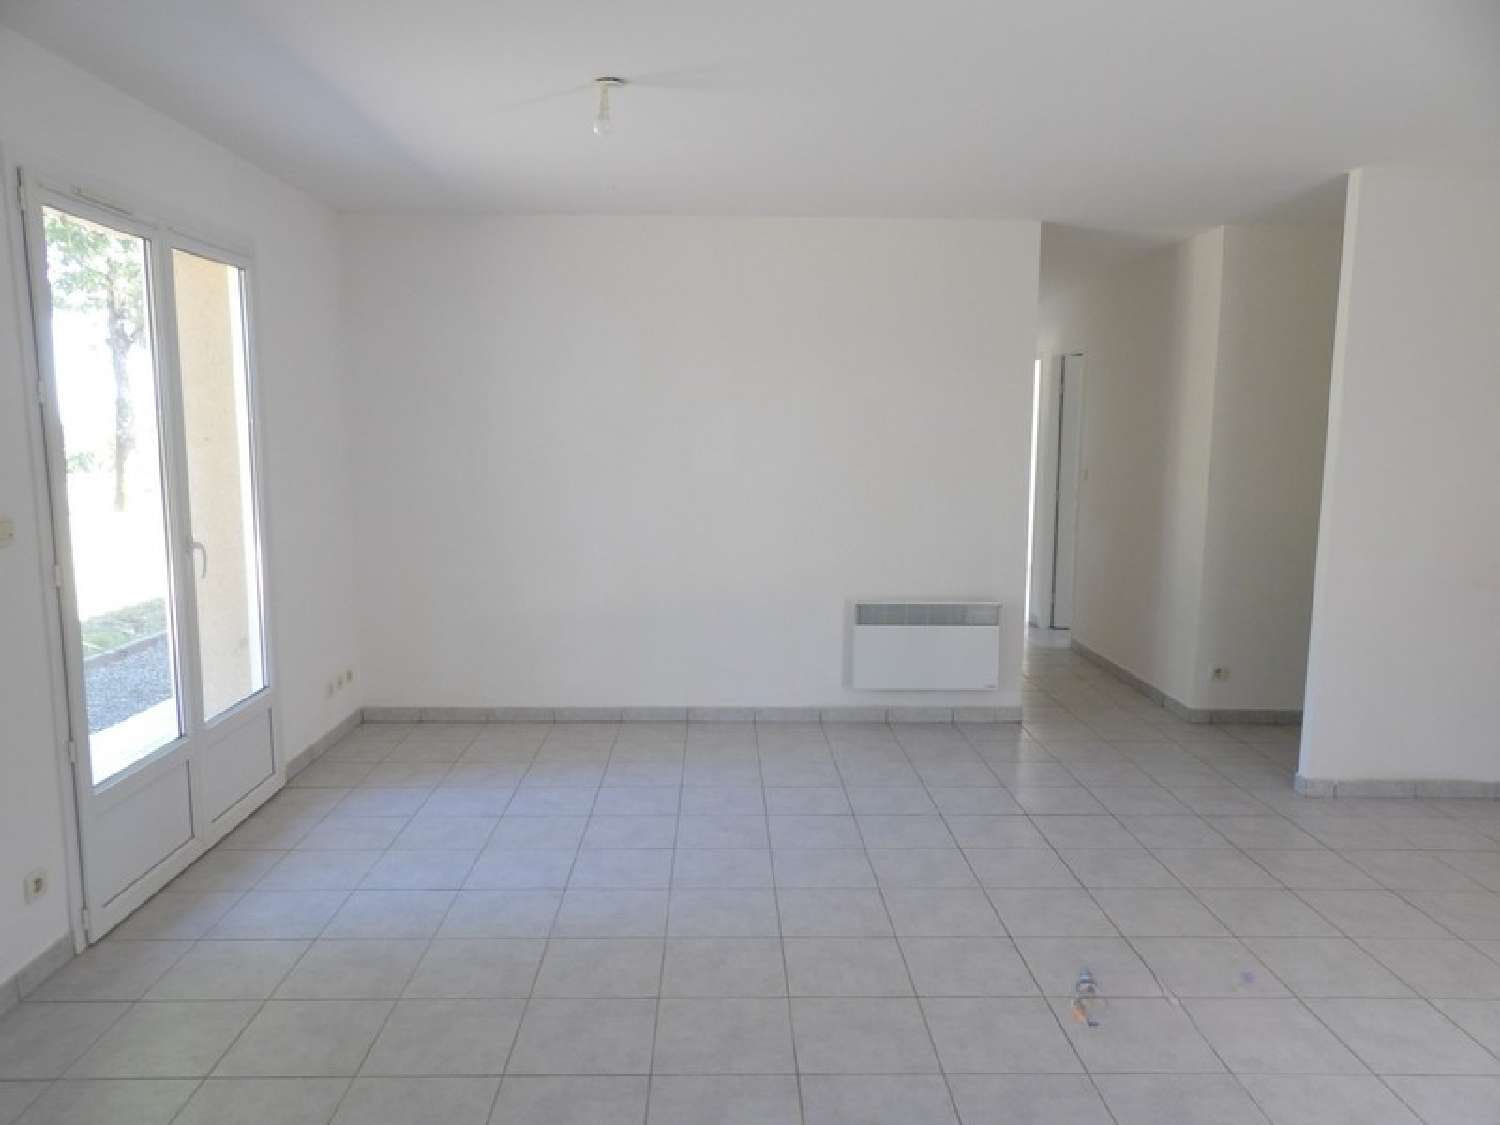  for sale house Monclar Gers 5